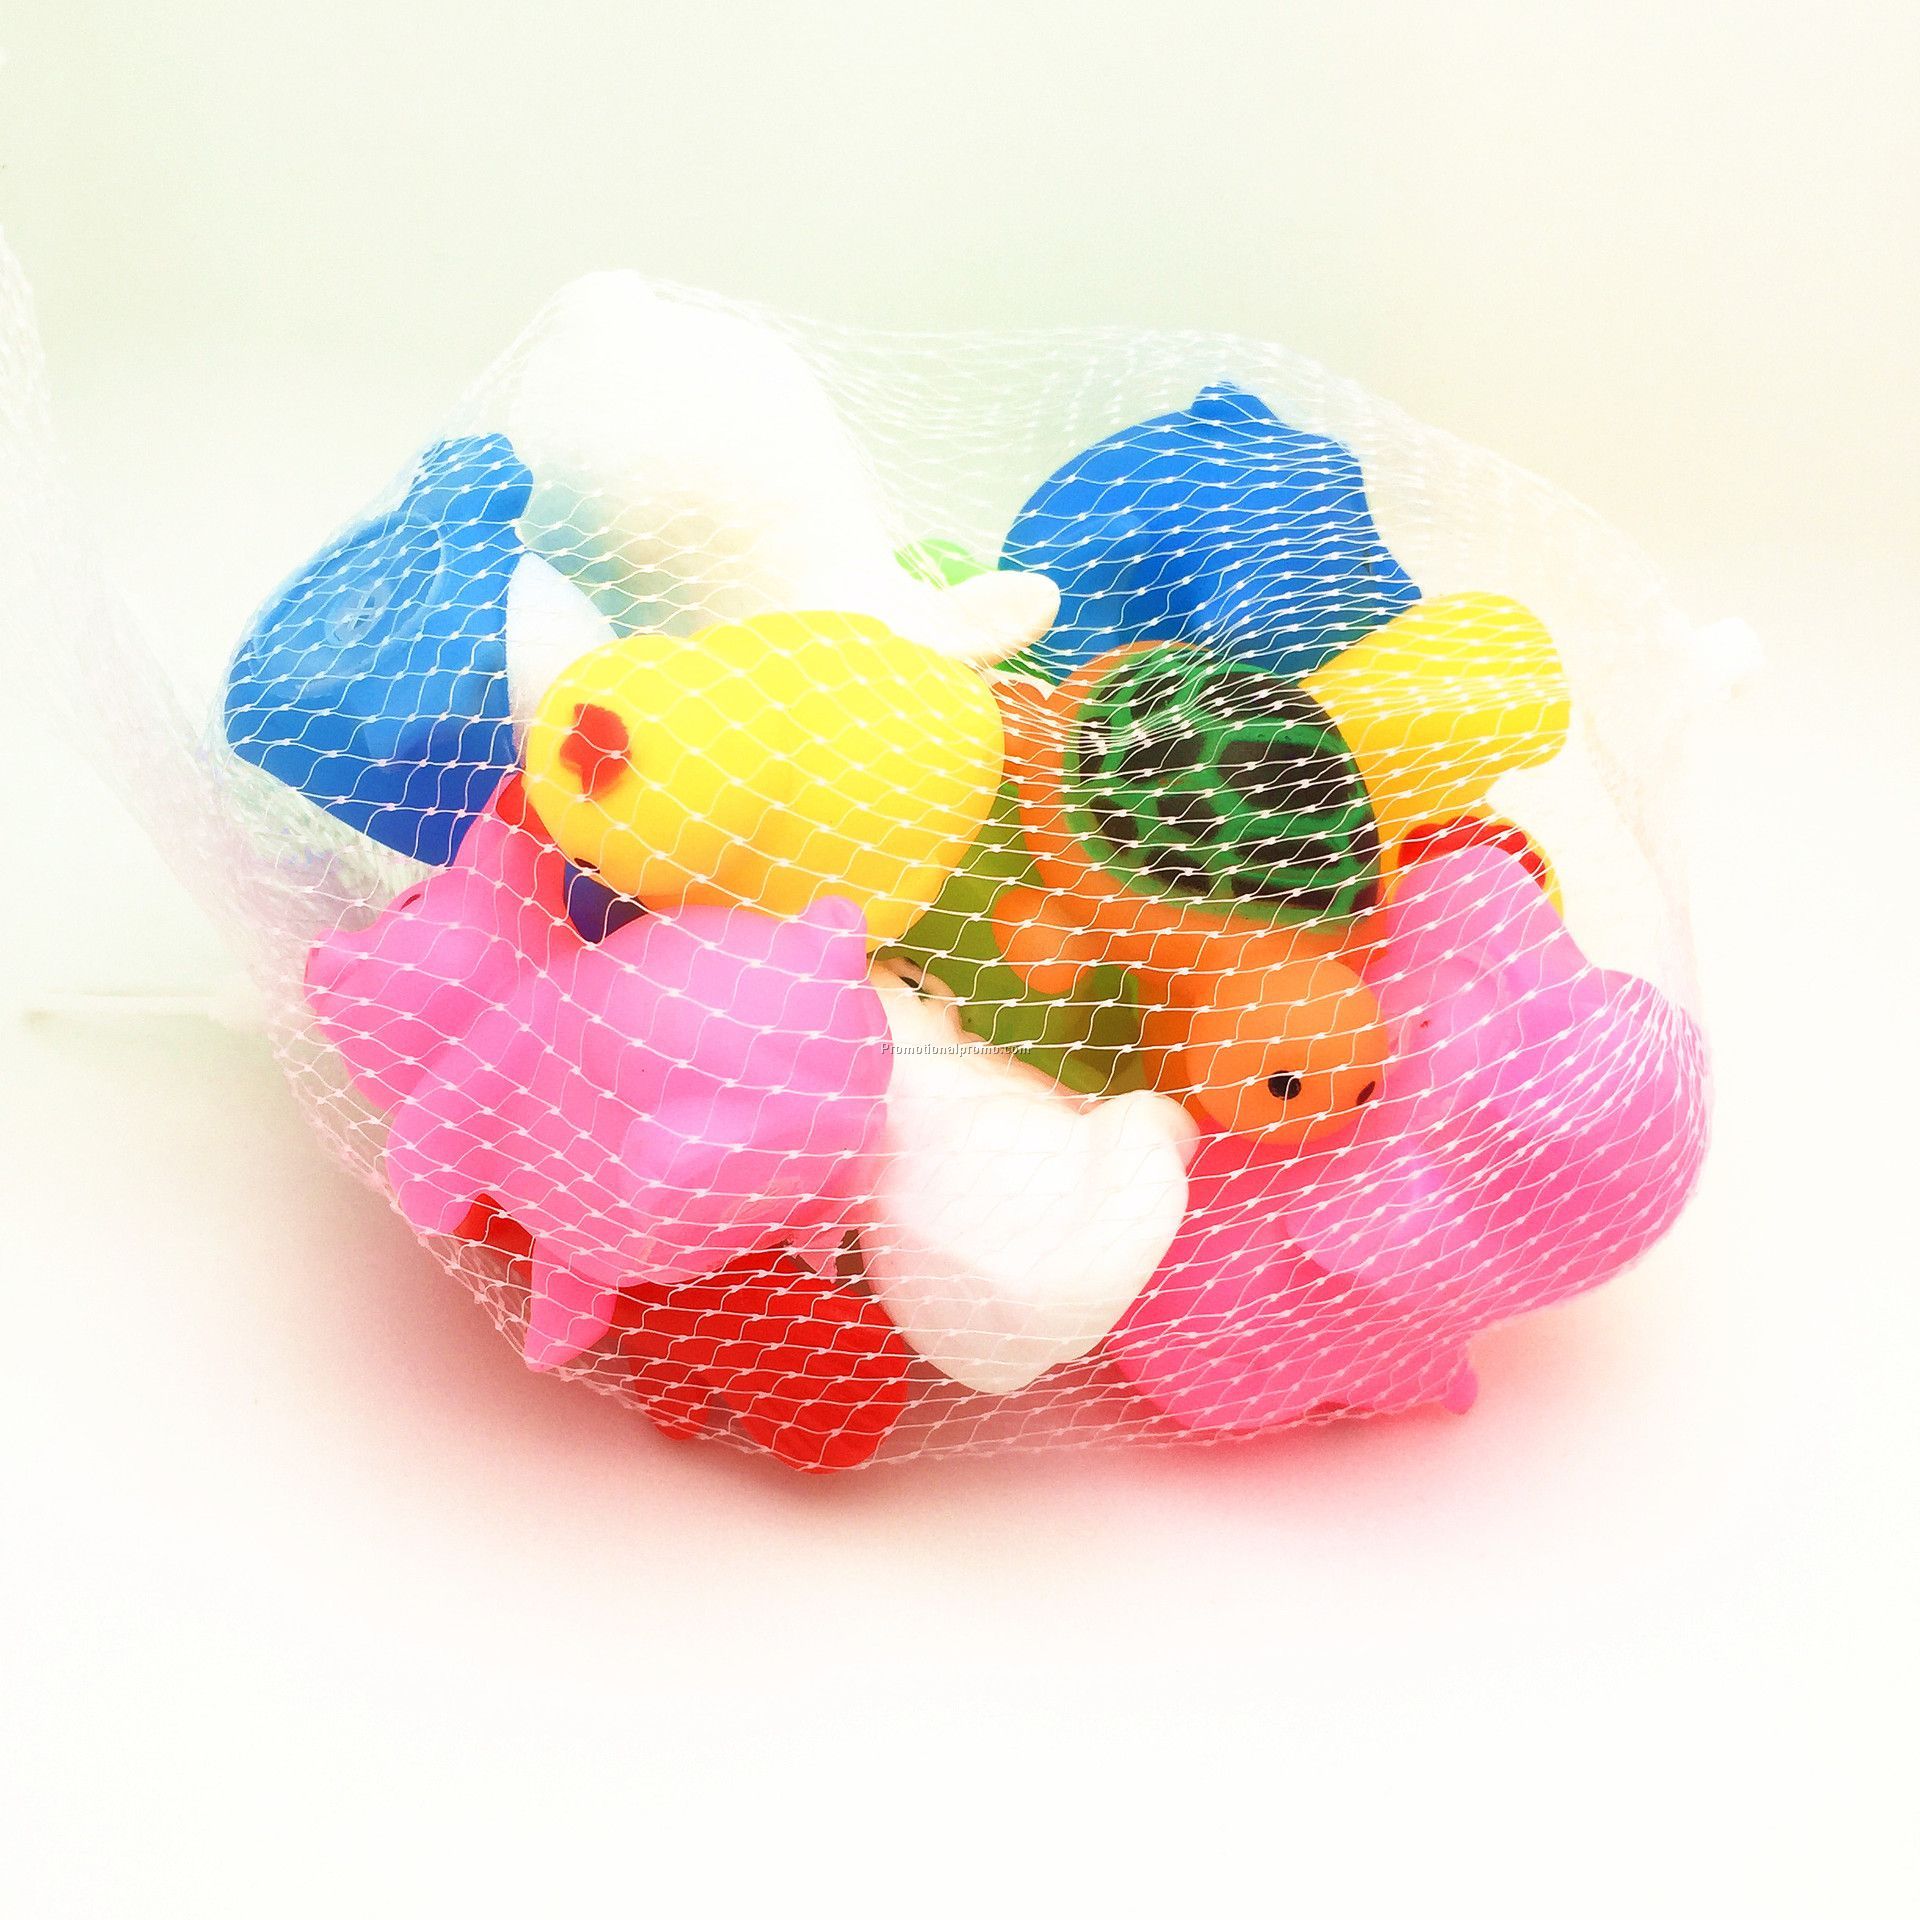 Hot floating rubber bathtub toy series for kids Photo 3